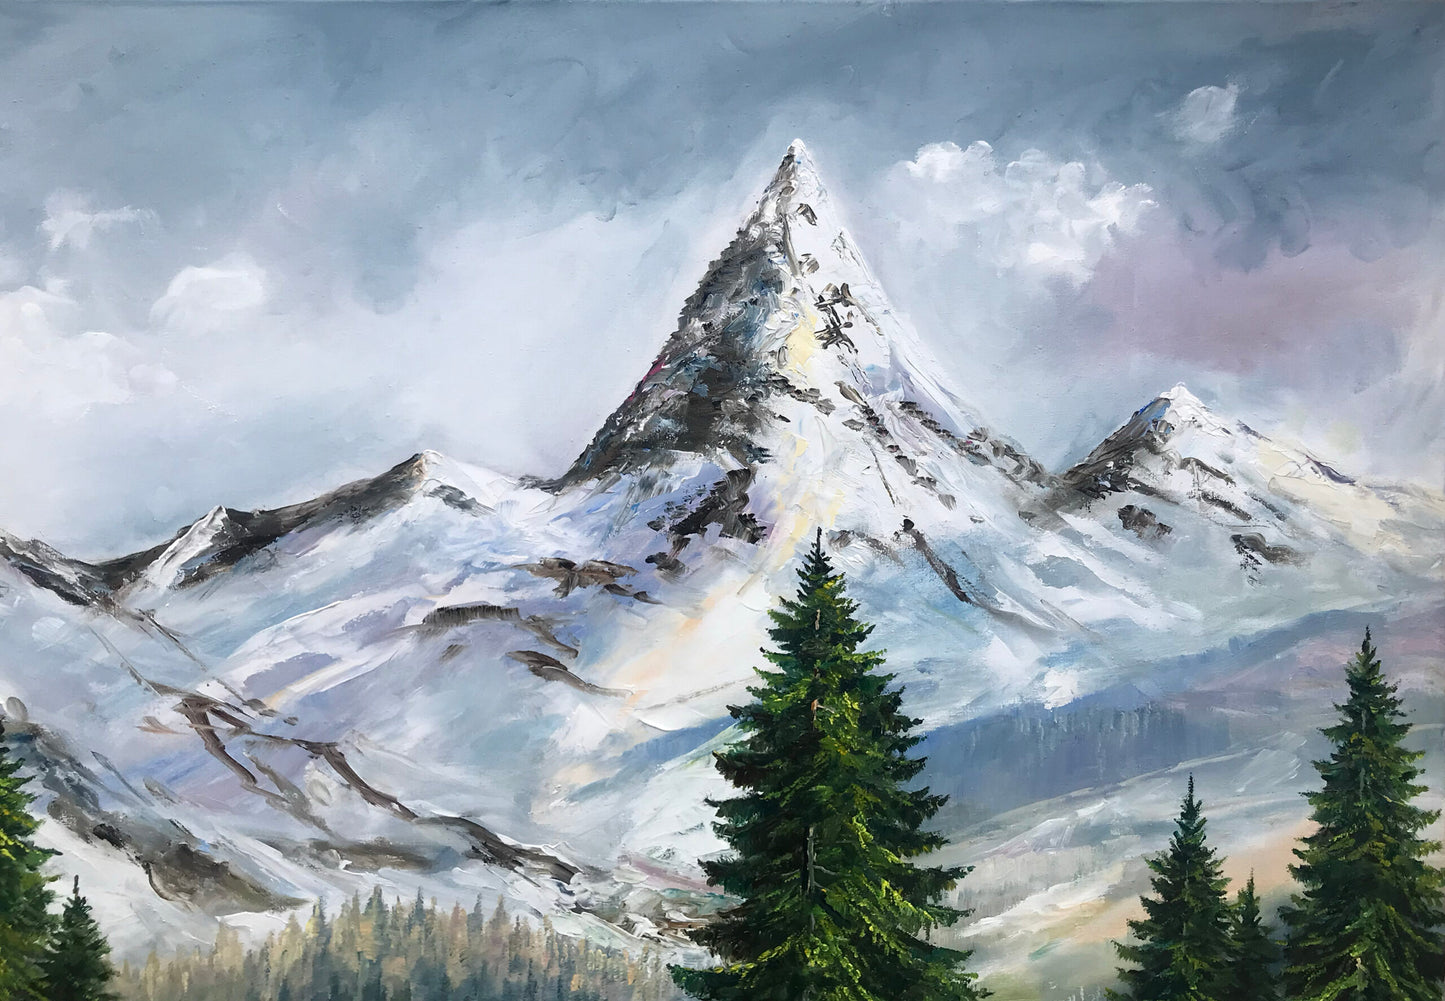 Colorado Mountain Painting on Canvas Emerald Lake Painting Snowy Mountain Wall Art Mountains Landscape Oil Painting Framed Nature Art